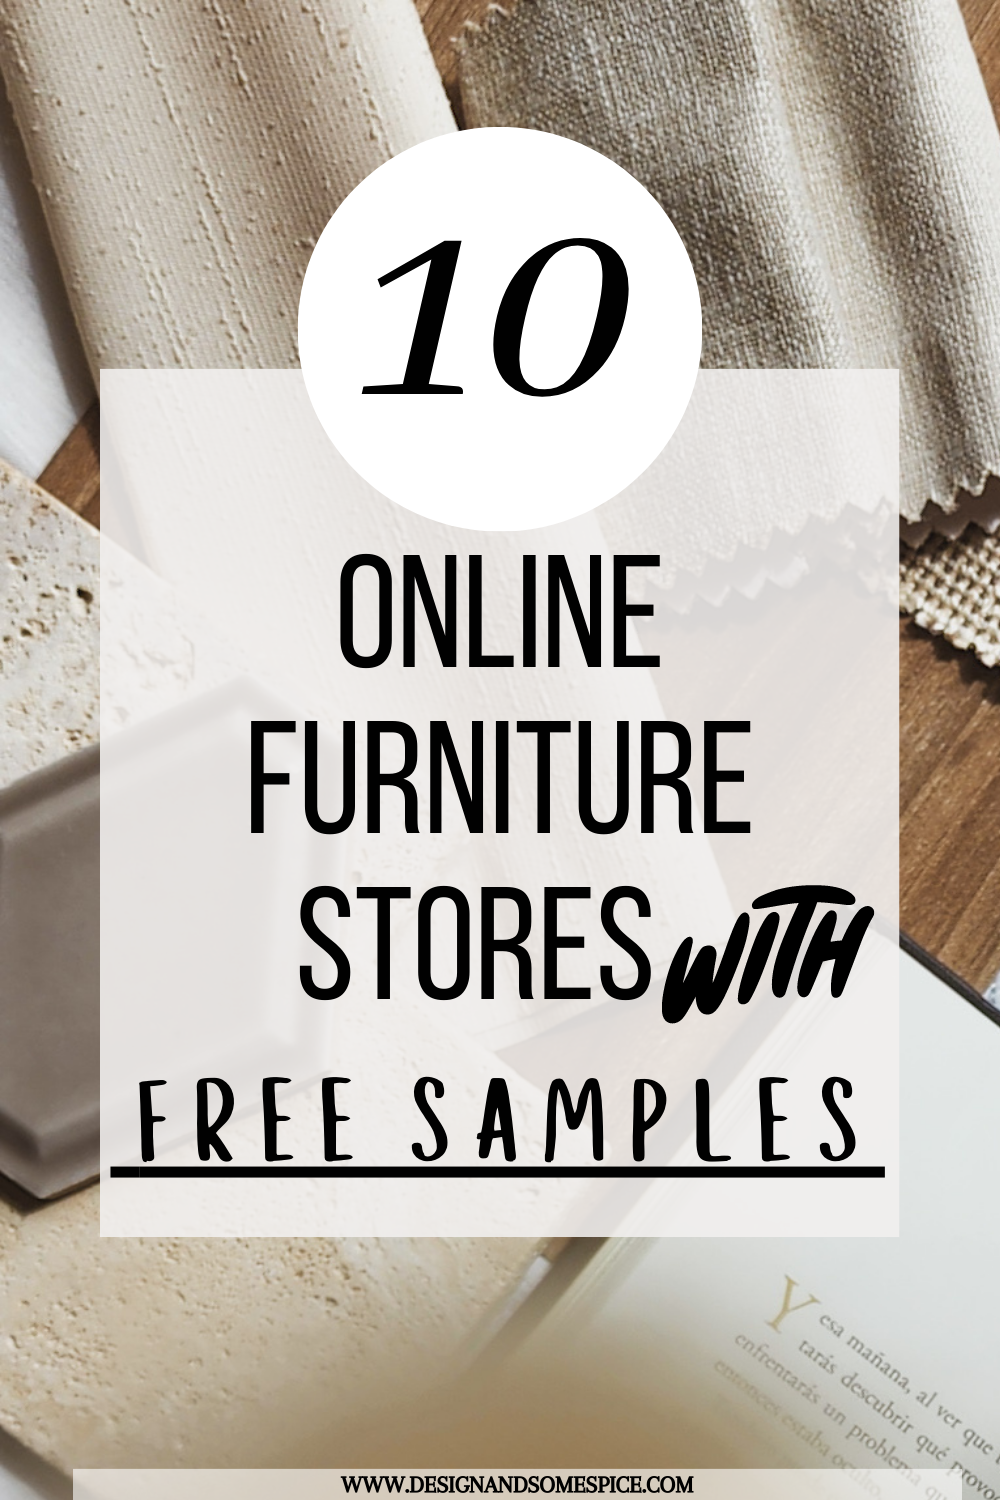 Try free furniture samples